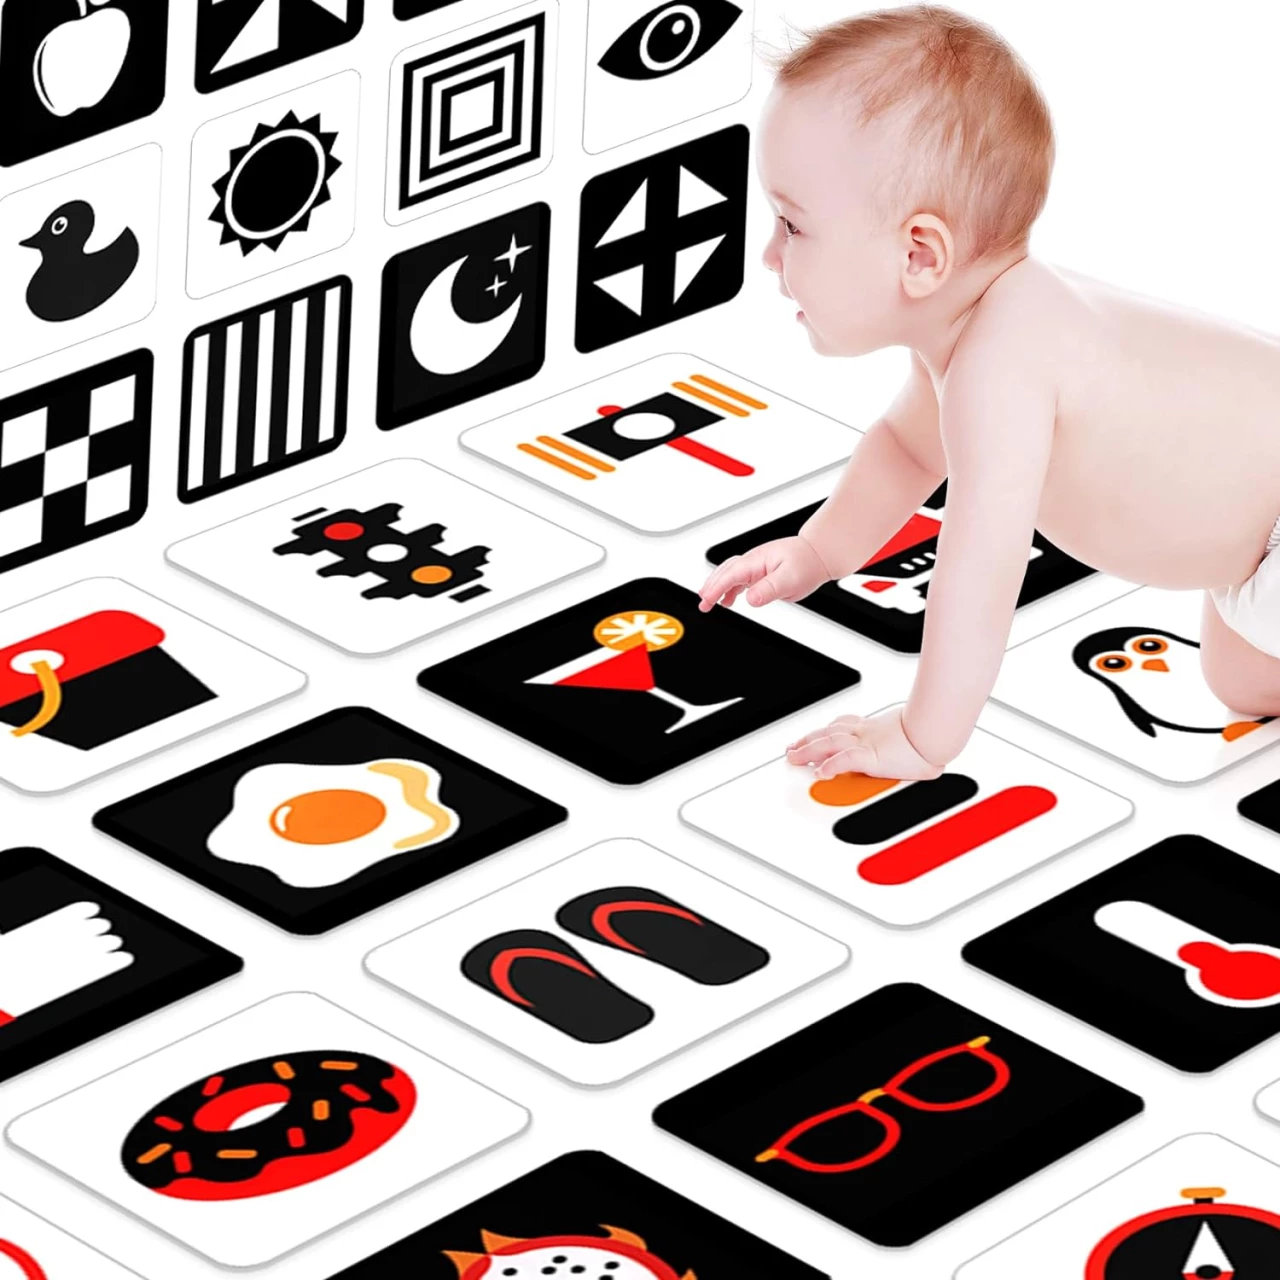 High Contrast Baby Toys for Newborn Baby Flash Cards Black and White Baby Toys 0-3 Months Tummy Time Toys for Babies 0-6 Months Montessori Visual Stimulation Infant Newborn Toys Baby Boy Gifts